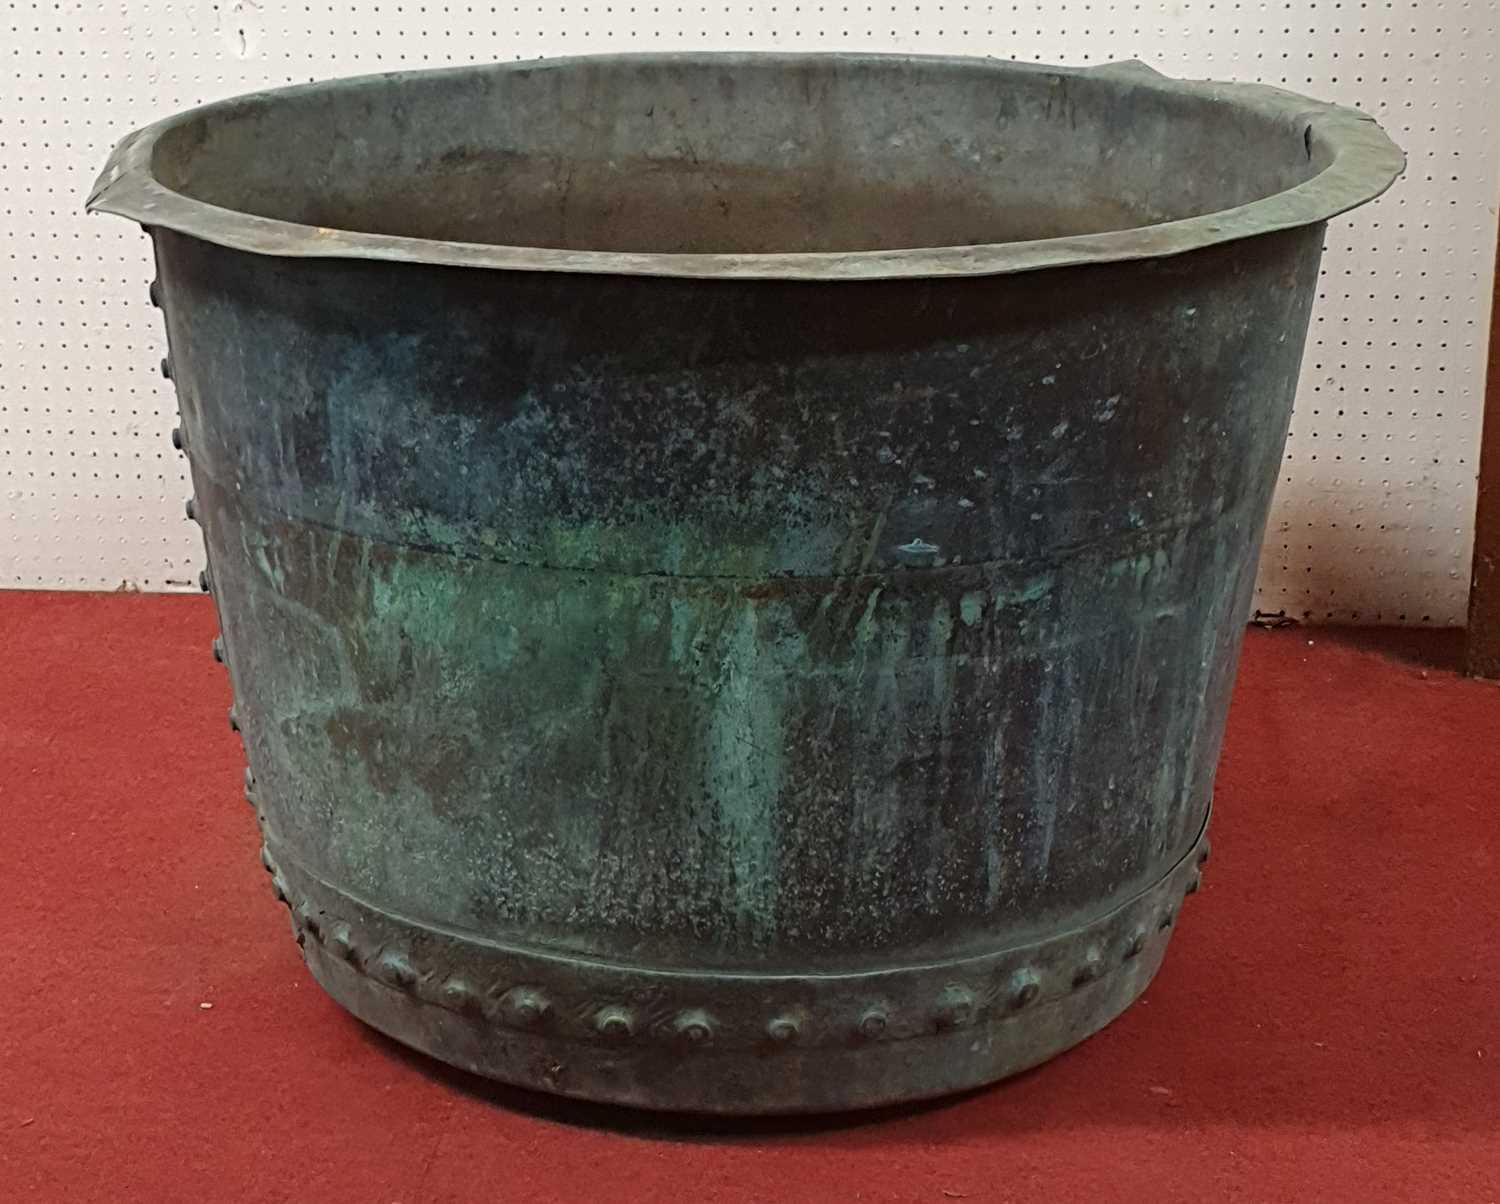 A circa 1900 large copper log bucket of circular form with riveted construction, verdigris patina, - Image 2 of 7